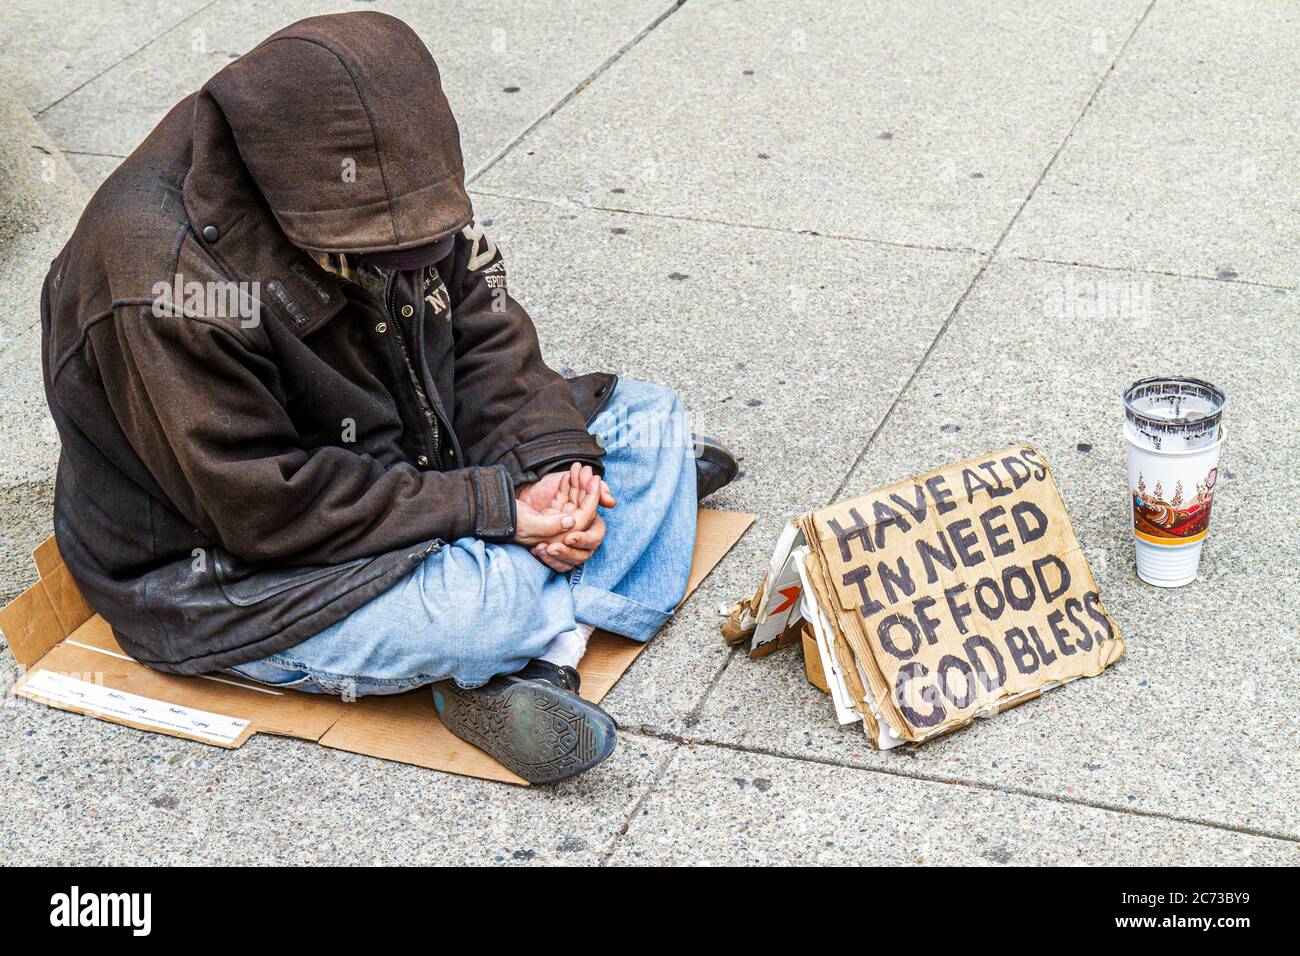 San Francisco California,Chinatown,Grant Street,homeless,poverty,beggar,vagrant,charity,sign,AIDS,hungry,hooded jacket,sitting on ground,cardboard,pap Stock Photo